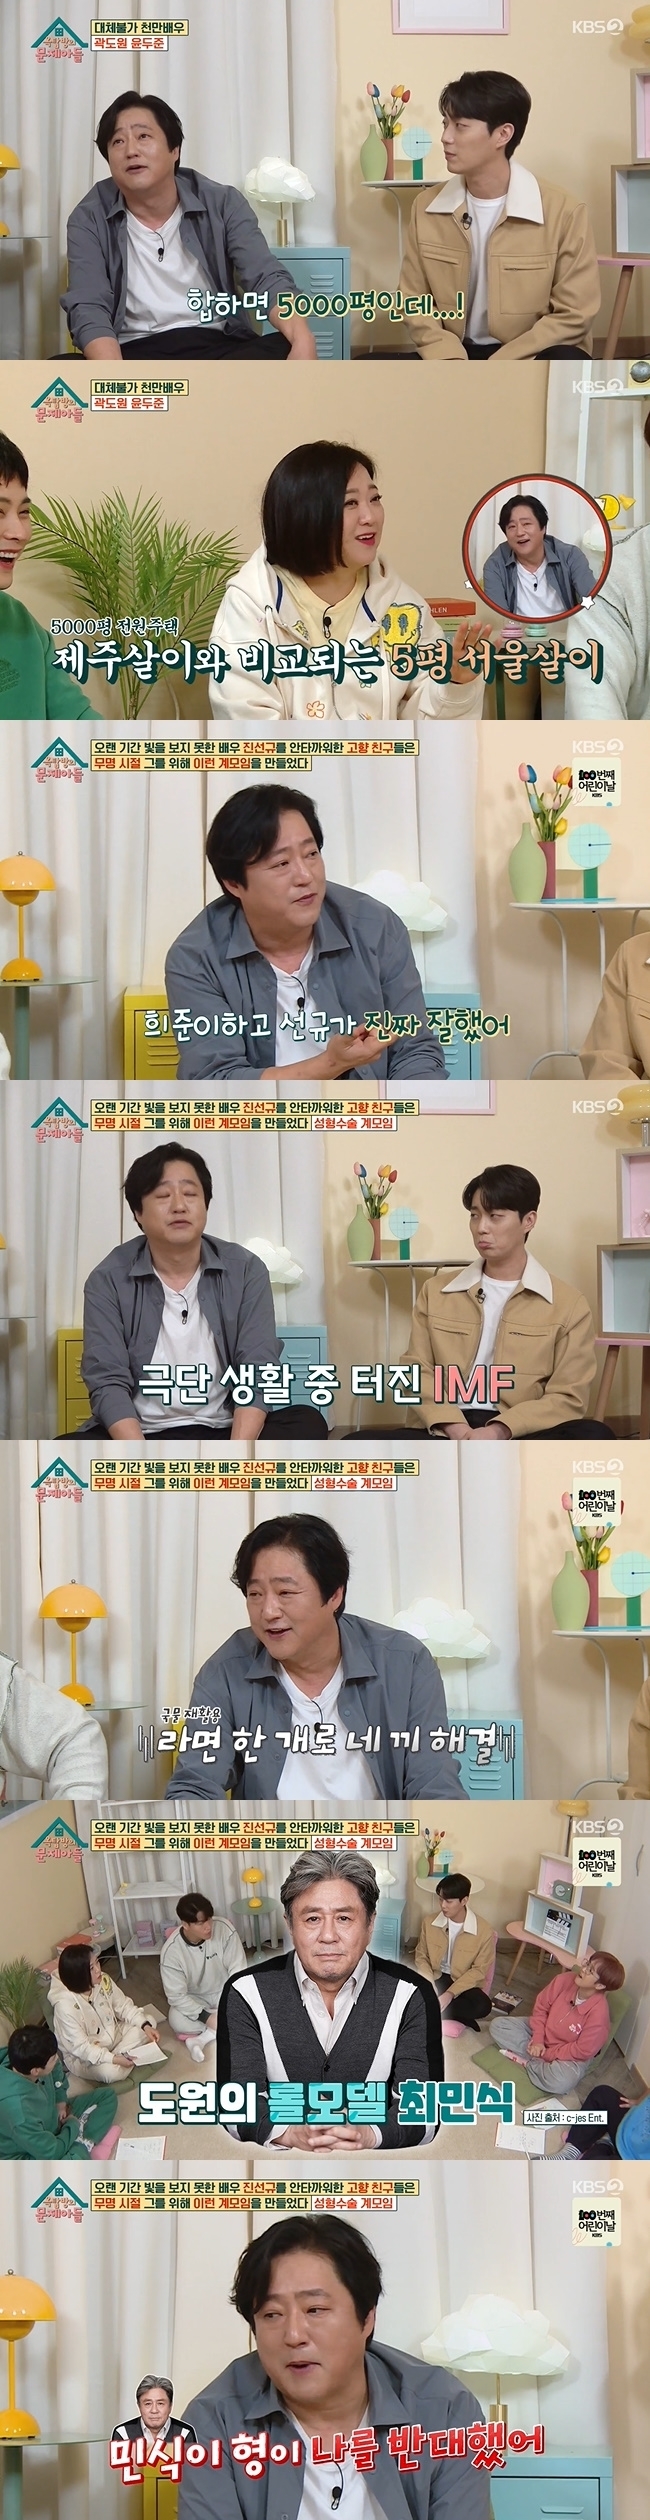 Kwak Do-won has revealed the occasion for living in Jeju Island and the story of land investment failure.Kwak Do-won and Yoon Doo-joon appeared on KBS 2TV The Trouble Son of the Rooftop broadcast on May 4.The two of them breathe through the drama I can not do it. Yoon Doo-joon said, I have been helped too much by Sunbather.I asked a lot of questions, but every time I was immersed in my work, I felt a lot. Kwak Do-won told the story of receiving acting guidance from Park Sung-Kwang during the appearance of EBS Bonnie Hani.I played detective and Park Sung-Kwang played villain. It was an educational broadcast and I played a role in the drama.At that time, his name was Kwak Byung-gyu, and he said, Kwak Byung-gyu, its a childrens entertainment program, but you can not do it that way.This is the main program, and Im sure hes mad at it, too, because he did it two or three times more and got cut off.Jeong Hyeong-don said, I made a video call with Park Sung-Kwang while drinking at Munna Bhai M.B.B.S. and Jeju Island.Im sorry, Munna Bhai M.B.B.S., he said in a back story.Kwak Do-won said she missed her Jeju Island life during recent filming and had homesickness.Kwak Do-won said, Since shooting is difficult, I went to Jeju Island for a day or two every time I got a gap for two or three days.The production team thankfully won a five-pyeong officetel. The next yard is 1,400 pyeong, which is 5,000 pyeong. But now it lives at 5 pyeong. Jeju Island can not be delivered.I had them all done by the delivery app at Seoul, but it was about a month later, so thats what I wanted to do.At the awards ceremony in the past, Jin Seon-gyu collected topics by mentioning that his acquaintances had heard cosmetic surgery for him during his obscurity.When I was at the extreme, Sun Gyu came as a student, Kwak Do-won said. Sun Gyu, Lee Hee Jun, and Kim Min Jae attended the same school.She was so good at the performance, and she was so good at it, and she was so good at it, he said. She is so good at her, he said. I dont know how awful she loves her.Kwak Do-won recalled his long, obscure days of memory.Kwak Do-won, who had been starving for four days during the IMF, went to the manpower office from 2 am and waited, but had to endure for a week at 17,000 won.I boil one of the ramen first and divide the noodles into four. I ate four meals with one ramen.I watched and secretly took the rice. When I got home, the rice was frozen. Kwak Do-won, who discovered himself living like a surplus man without leaving the house for six to seven months, shot two short films.Kwak Do-won auditioned for a commercial movie after the movie was broadcast on KBS as a short film special program, with an assistant director who saw it.Kwak Do-won mentioned Choi Min-sik as his role model.Kwak Do-won, who identified Choi Min-sik as his spiritual landlord, said Choi Min-sik opposed him during his appearance in the War on Crime.Kwak Do-won said, I am too unknown to play a role.The first scene to be cast and attached to Choi Min-sik Sunbather was the scene of the interrogation room. Choi Min-sik came to the house to gather among the assistants and drink near the hostel.I thought he was coming because he said, Ill say something before I get drunk. He said, Ive learned a lot of things. He said, Youre trying to kill me.It meant to be strong, if you think about it now. It gave you confidence.Kwak Do-won confessed that the character in the movie The Wailing was not his role.The casting the production team wanted was Song Gang-ho, Sunbather. I didnt know that.When I was on stage greetings for the lawyer, I heard a scenario about The Wailing. When Kang was thinking about it, I asked Kang Ho.He said he wouldnt do it. He gave me a chance now, he said.Kwak Do-won said he went to the guest house with a close film director and decided to live in Jeju.Kwak Do-won, who had a fun talking to people who had first seen him at a meat party at the guest house, said, It was originally a two-night, three-day schedule.I ran out of money, came back to Seoul, then went back to work, and then went down again, and the period got longer and longer, and I moved my address to live.When Kim Jong-kook asked, The land price will rise a lot, Kwak Do-won lamented deeply.Kwak Do-won said, I bought the land between hotels and pensions. I dont know how many SONAMOOs.I told him that the law had changed a year before the land was bought and he couldnt get groundwater, he said. I had to bring it from another village.I have to take him seven kilometers. He said he had to spend three hundred and fifty thousand groundwater on the land price of two hundred and fifty thousand.Kim Jong-kook comforted him, Do something like futsal place there, but Kwak Do-won said, I said there are many SONAMOOs.Jeju Island cant cut off SONAMOOs, all SONAMOOs. Kim Jong-kook was saddened that water was not the problem in the first place.